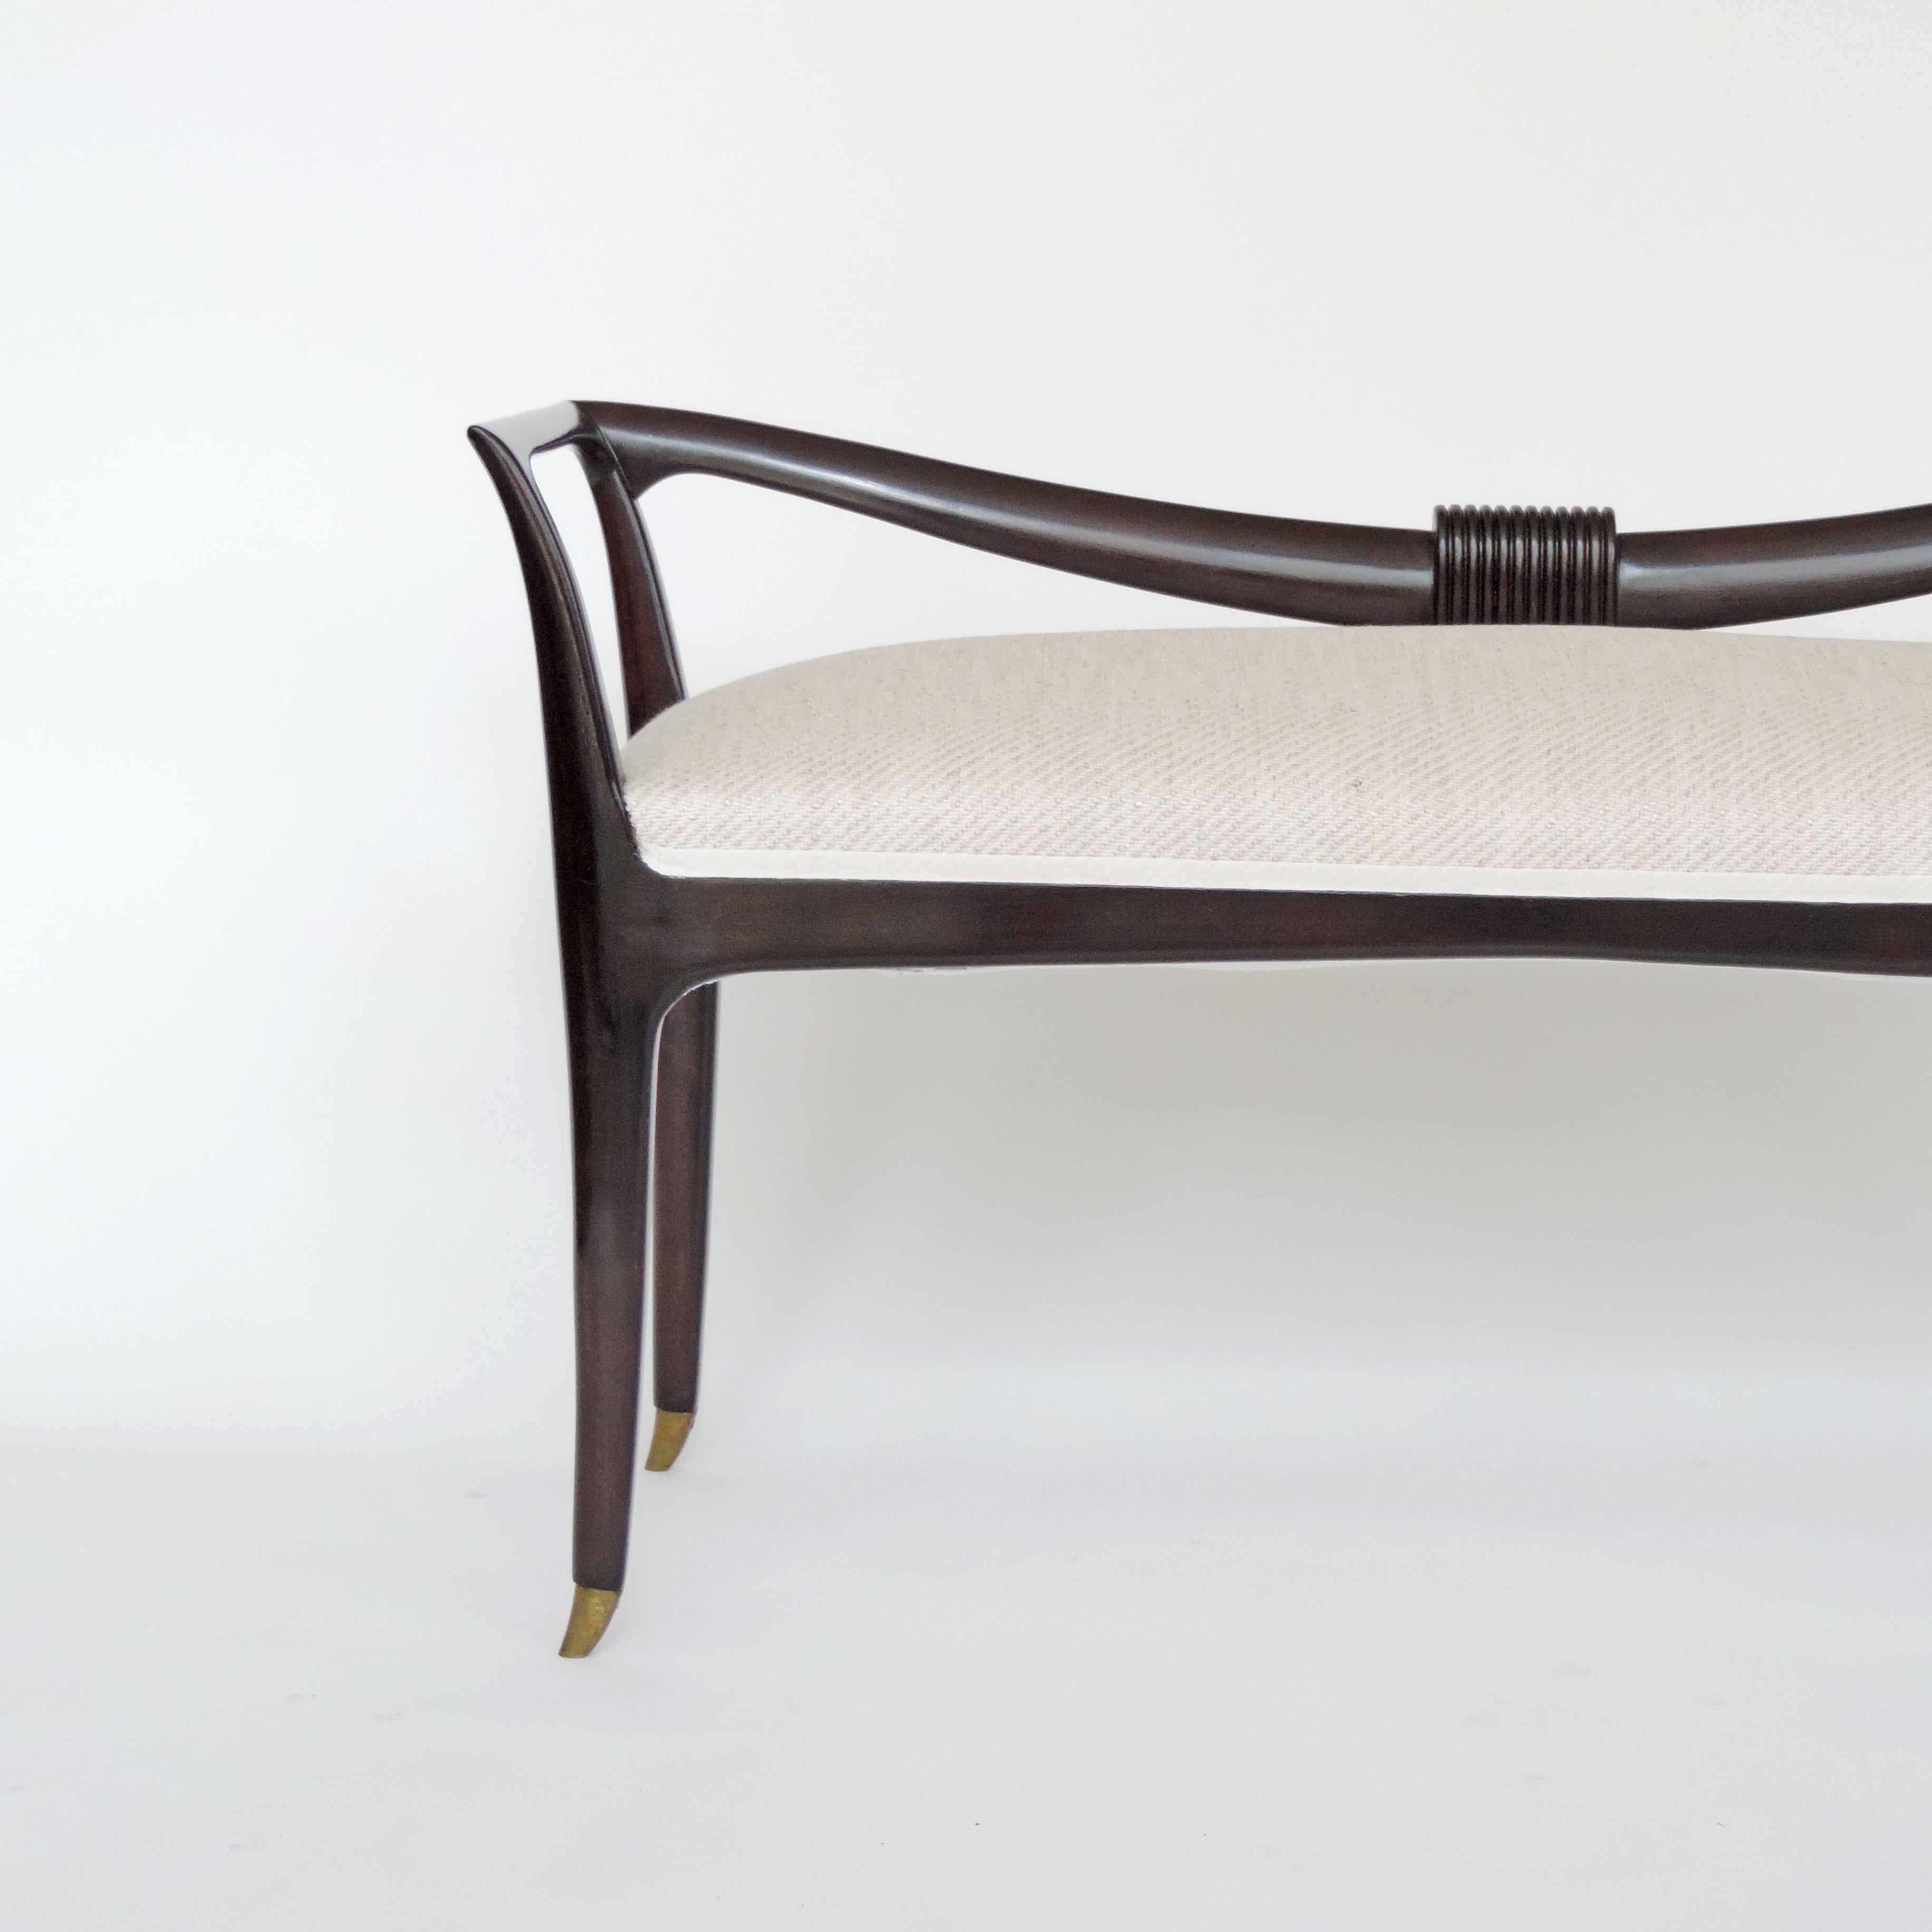 Small Settee attributed to Emilio Lancia, Italy, 1940s
Brass feet.